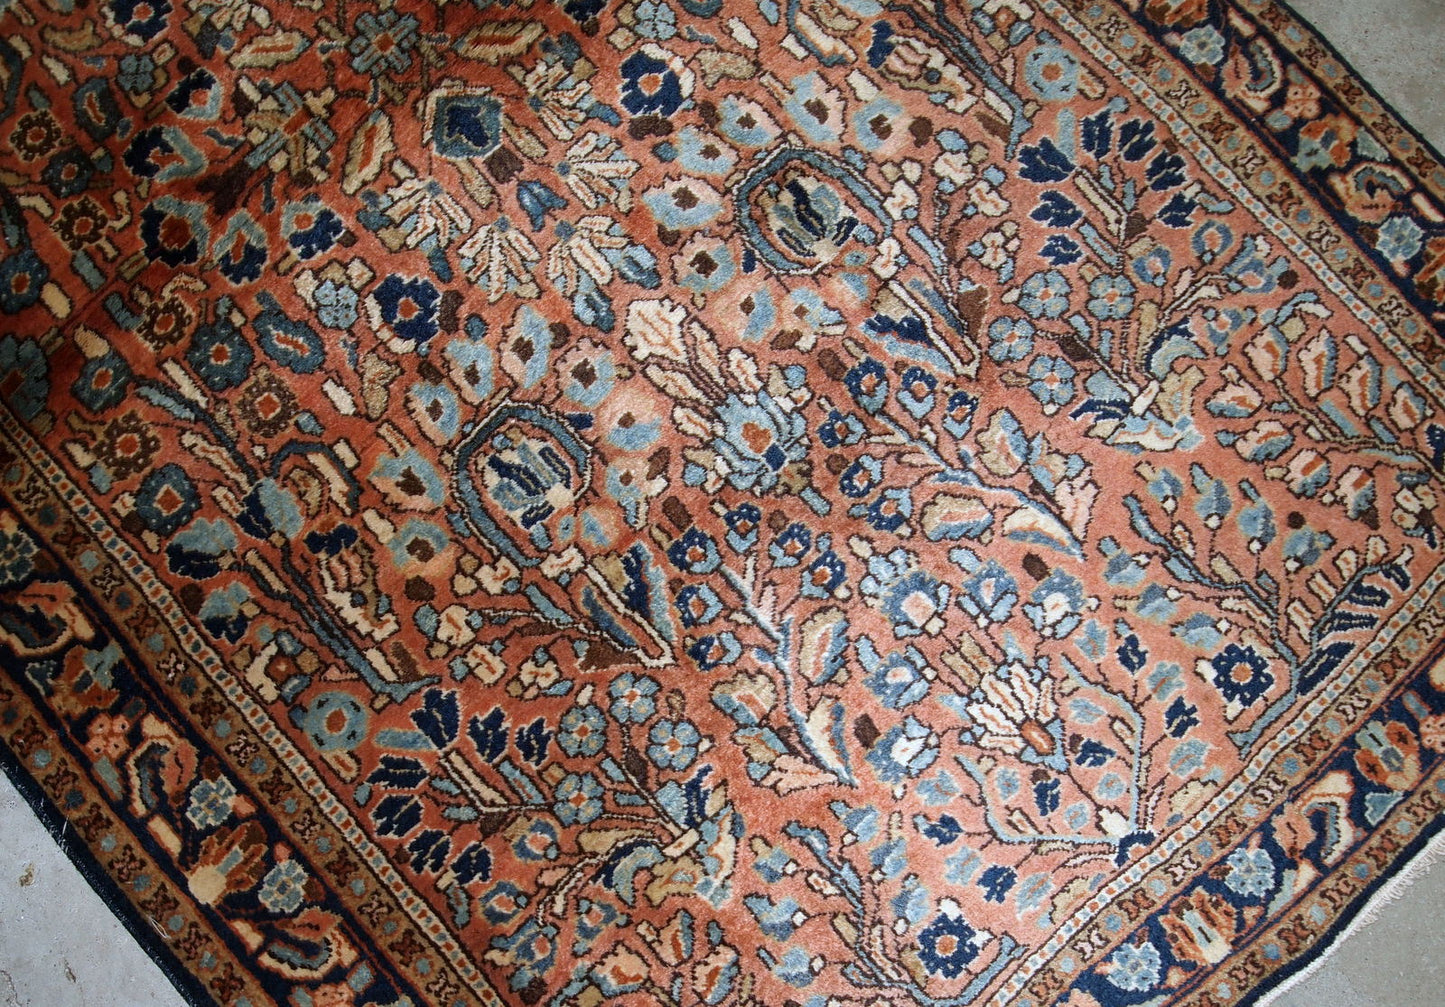 Hand-weaved antique Sarouk rug from the beginning of 20th century. The rug is in original good condition, made in classic floral design in red and sky blue shades.